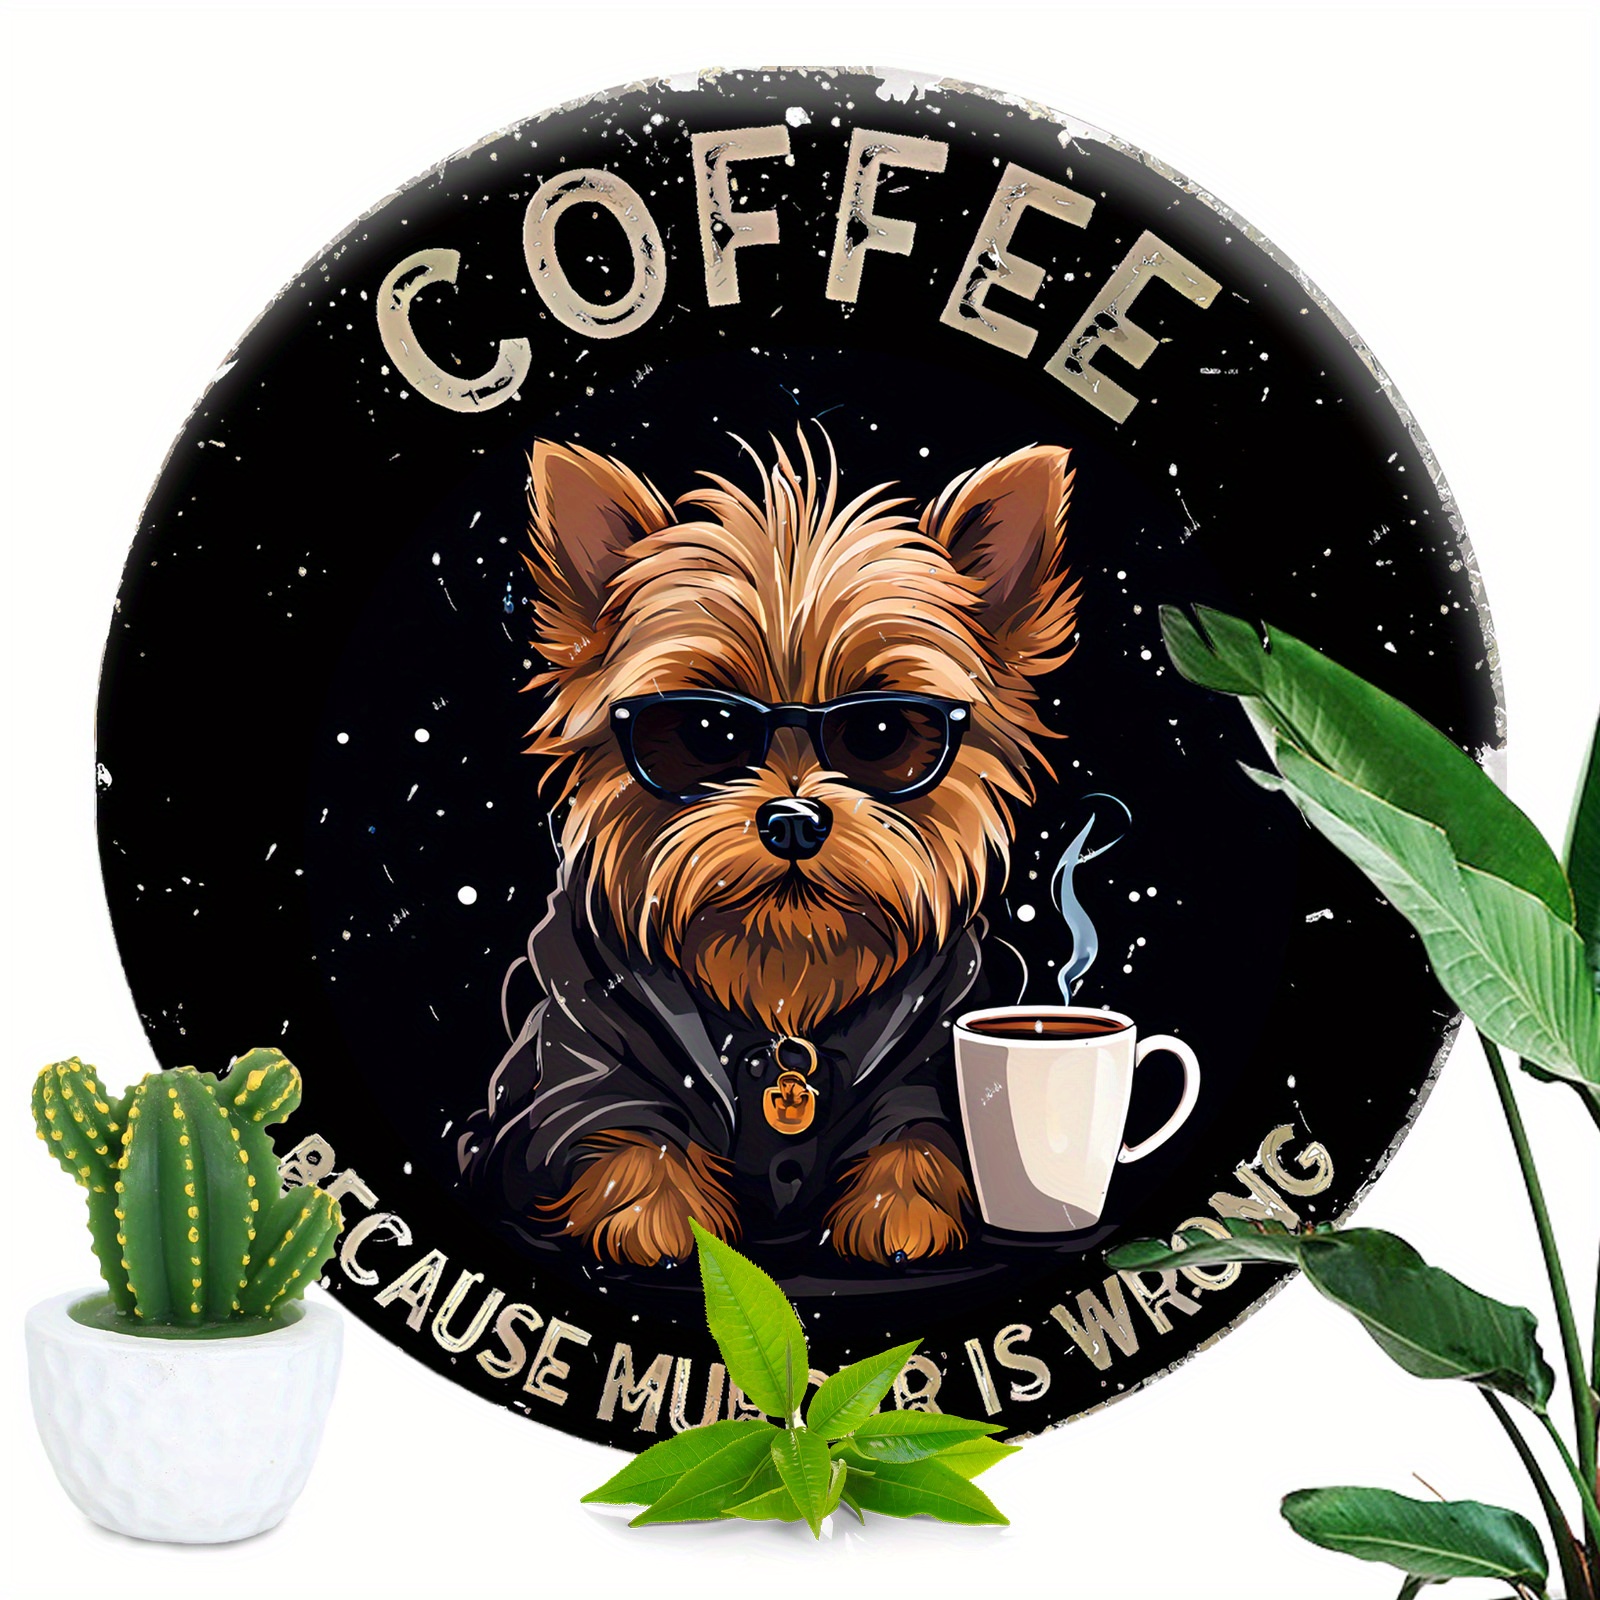 

1pc 8x8 Inch (20x20cm) Round Aluminum Sign Coffee Because Murder Is Wrong Funny Yorkshire Terrier Vintage Round Metal Sign Funny Bar Coffee Sign For Cafe Kitchen Club Bar Home Wall Art & Decor Gift